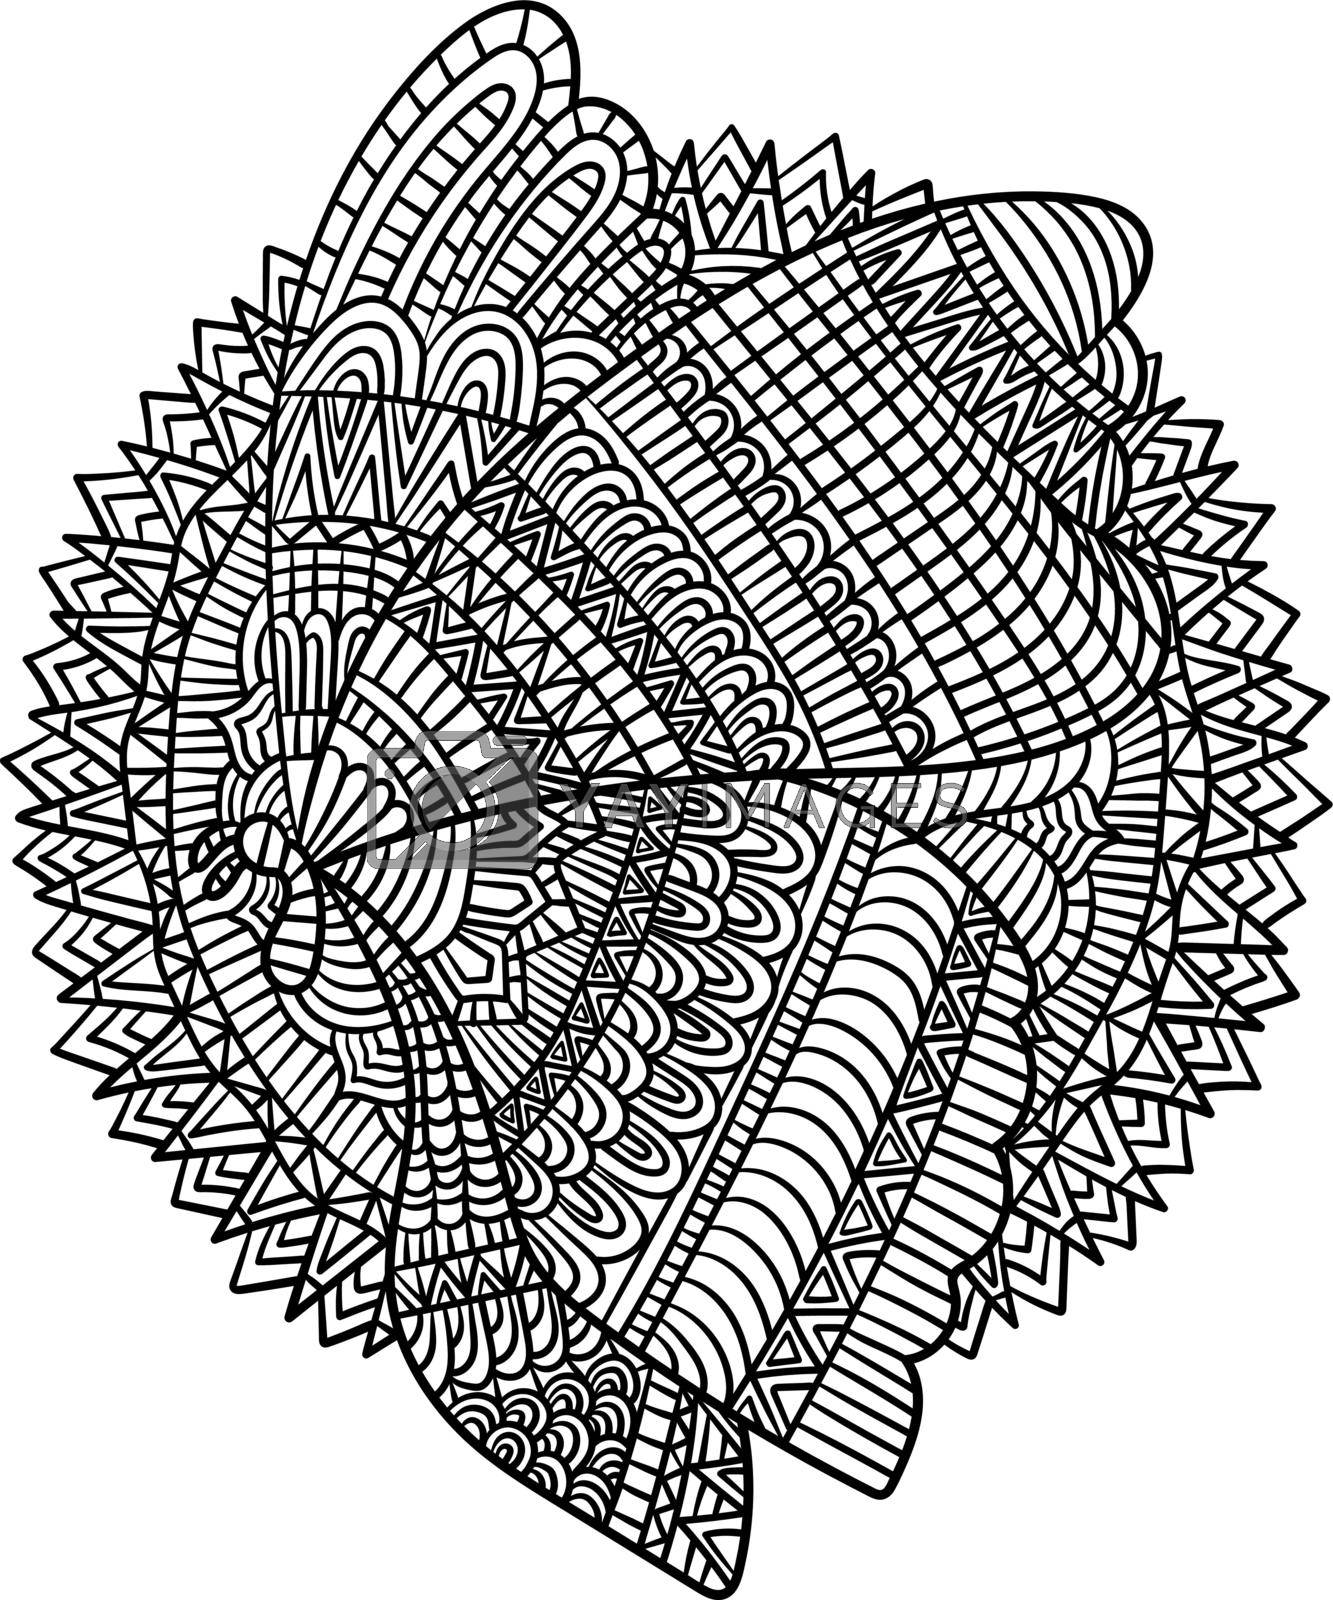 Royalty free image of Butterfly Mandala Coloring Pages for Adults by abbydesign